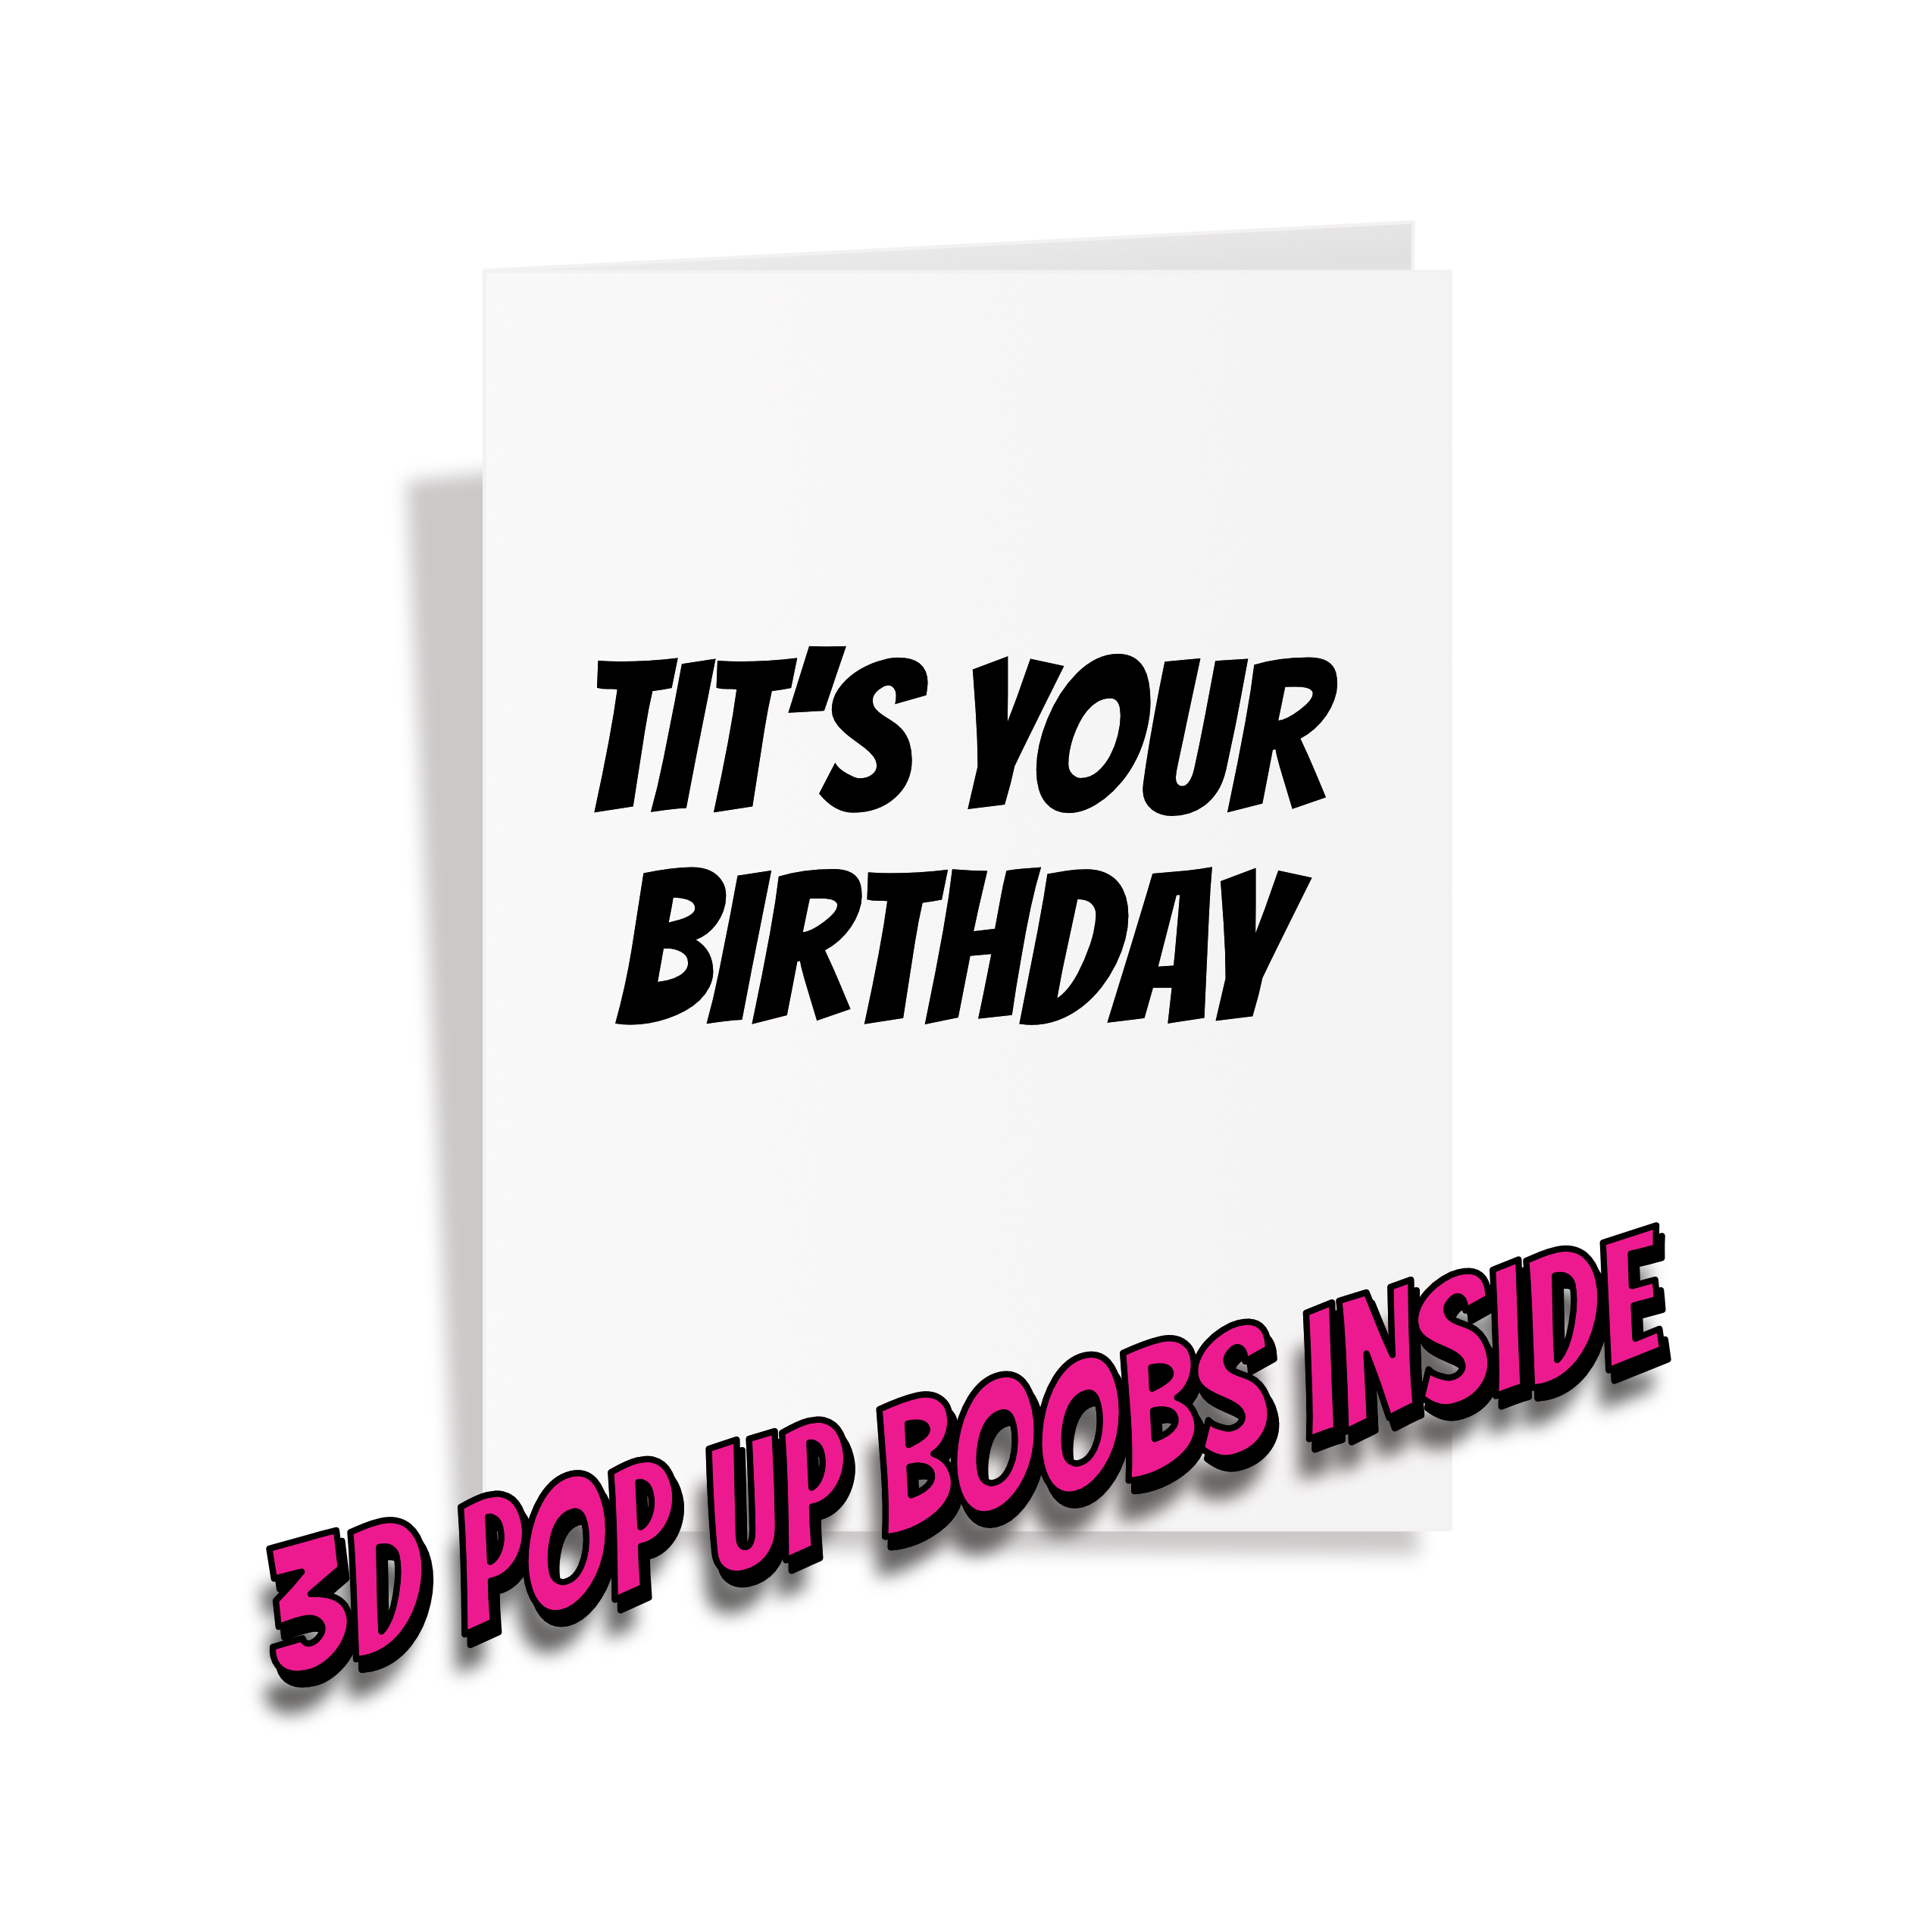 Tits Your Birthday - 3D Pop Up Boob Card - Dicks By Mail - Anonymously mail a bag of dicks